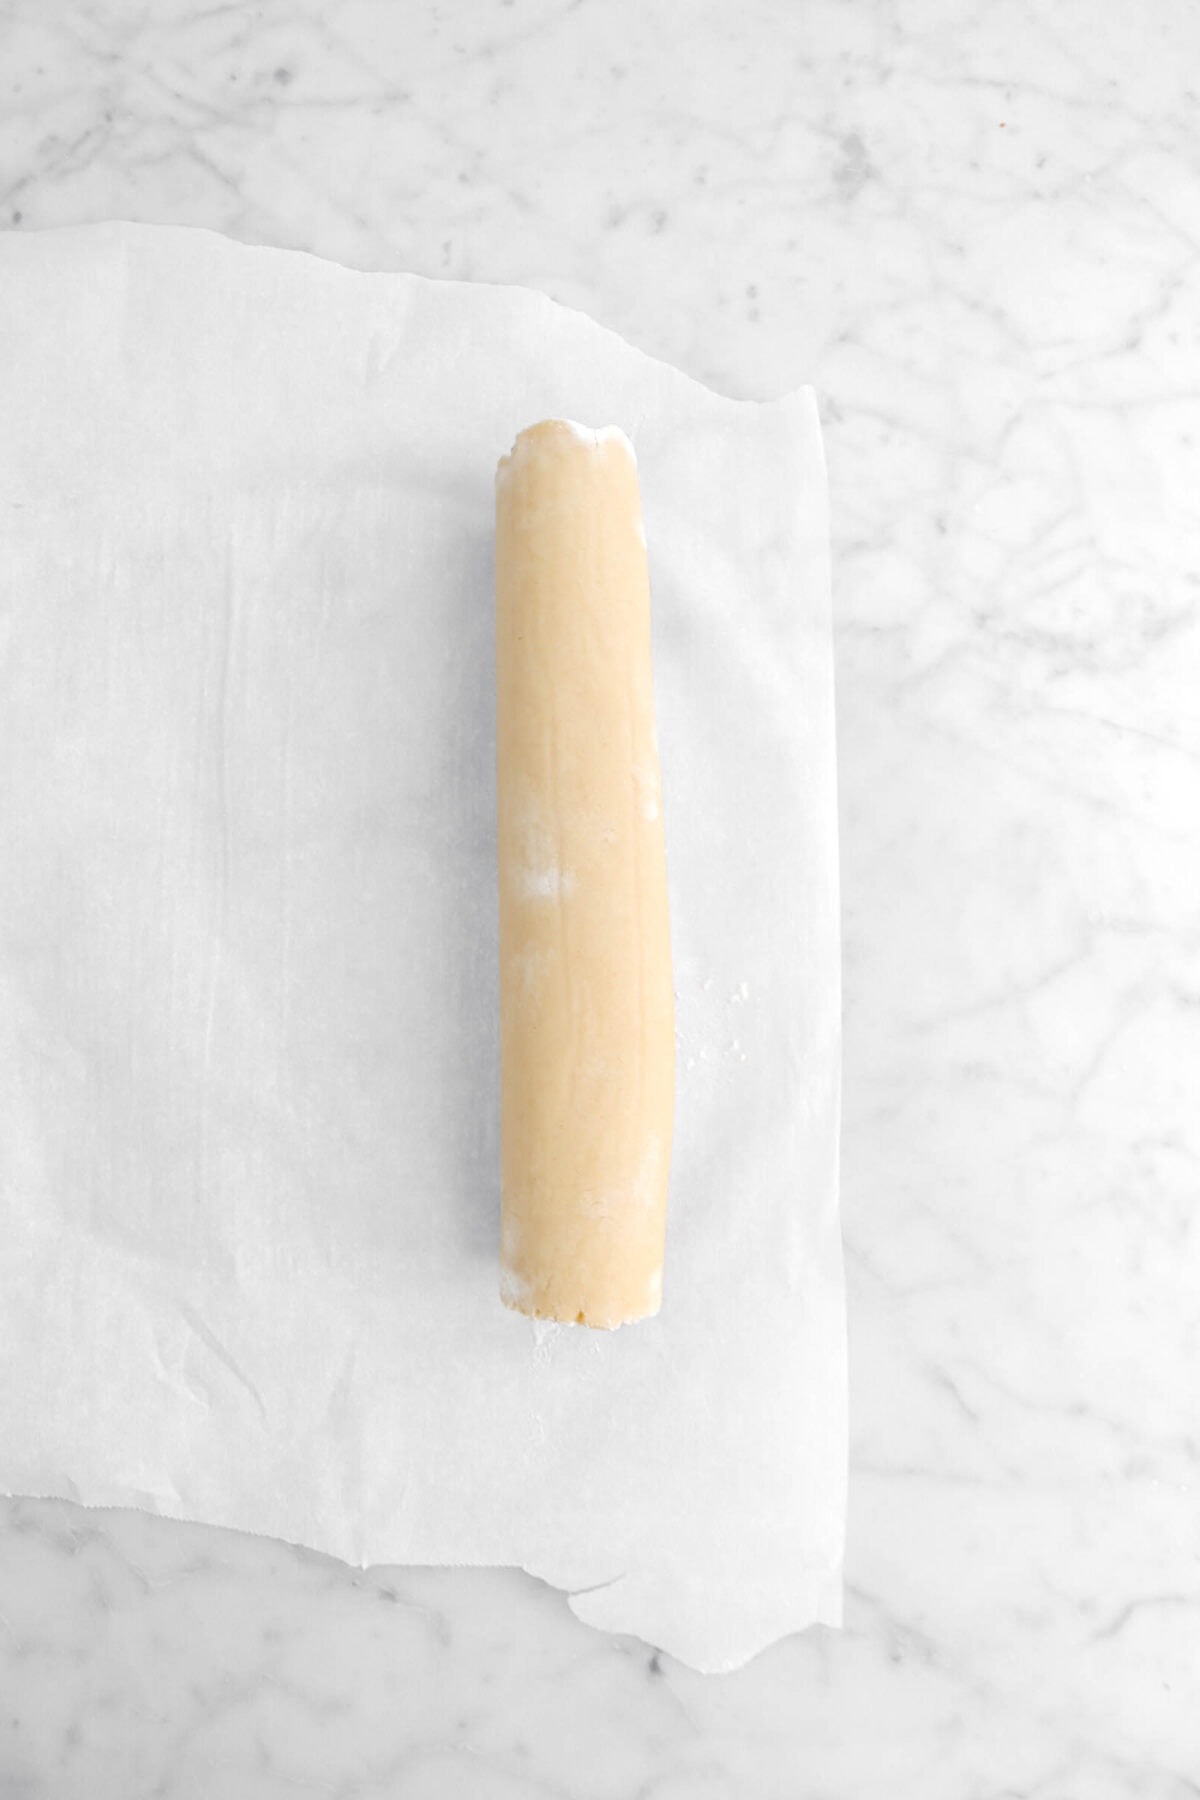 dough rolled into a log on parchment paper.